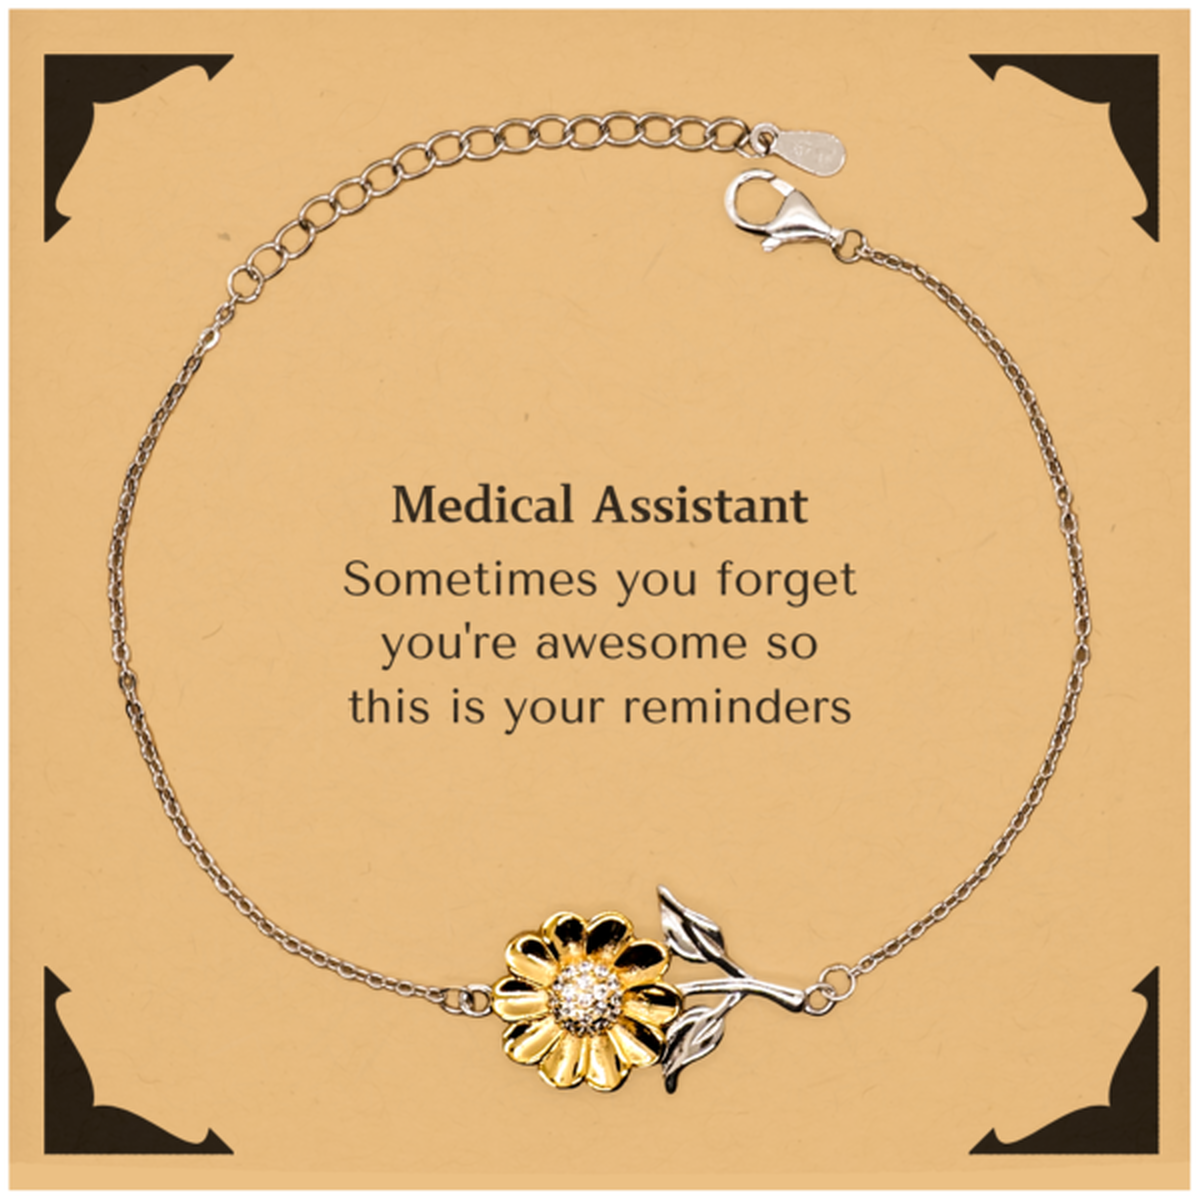 Sentimental Medical Assistant Sunflower Bracelet, Medical Assistant Sometimes you forget you're awesome so this is your reminders, Graduation Christmas Birthday Gifts for Medical Assistant, Men, Women, Coworkers